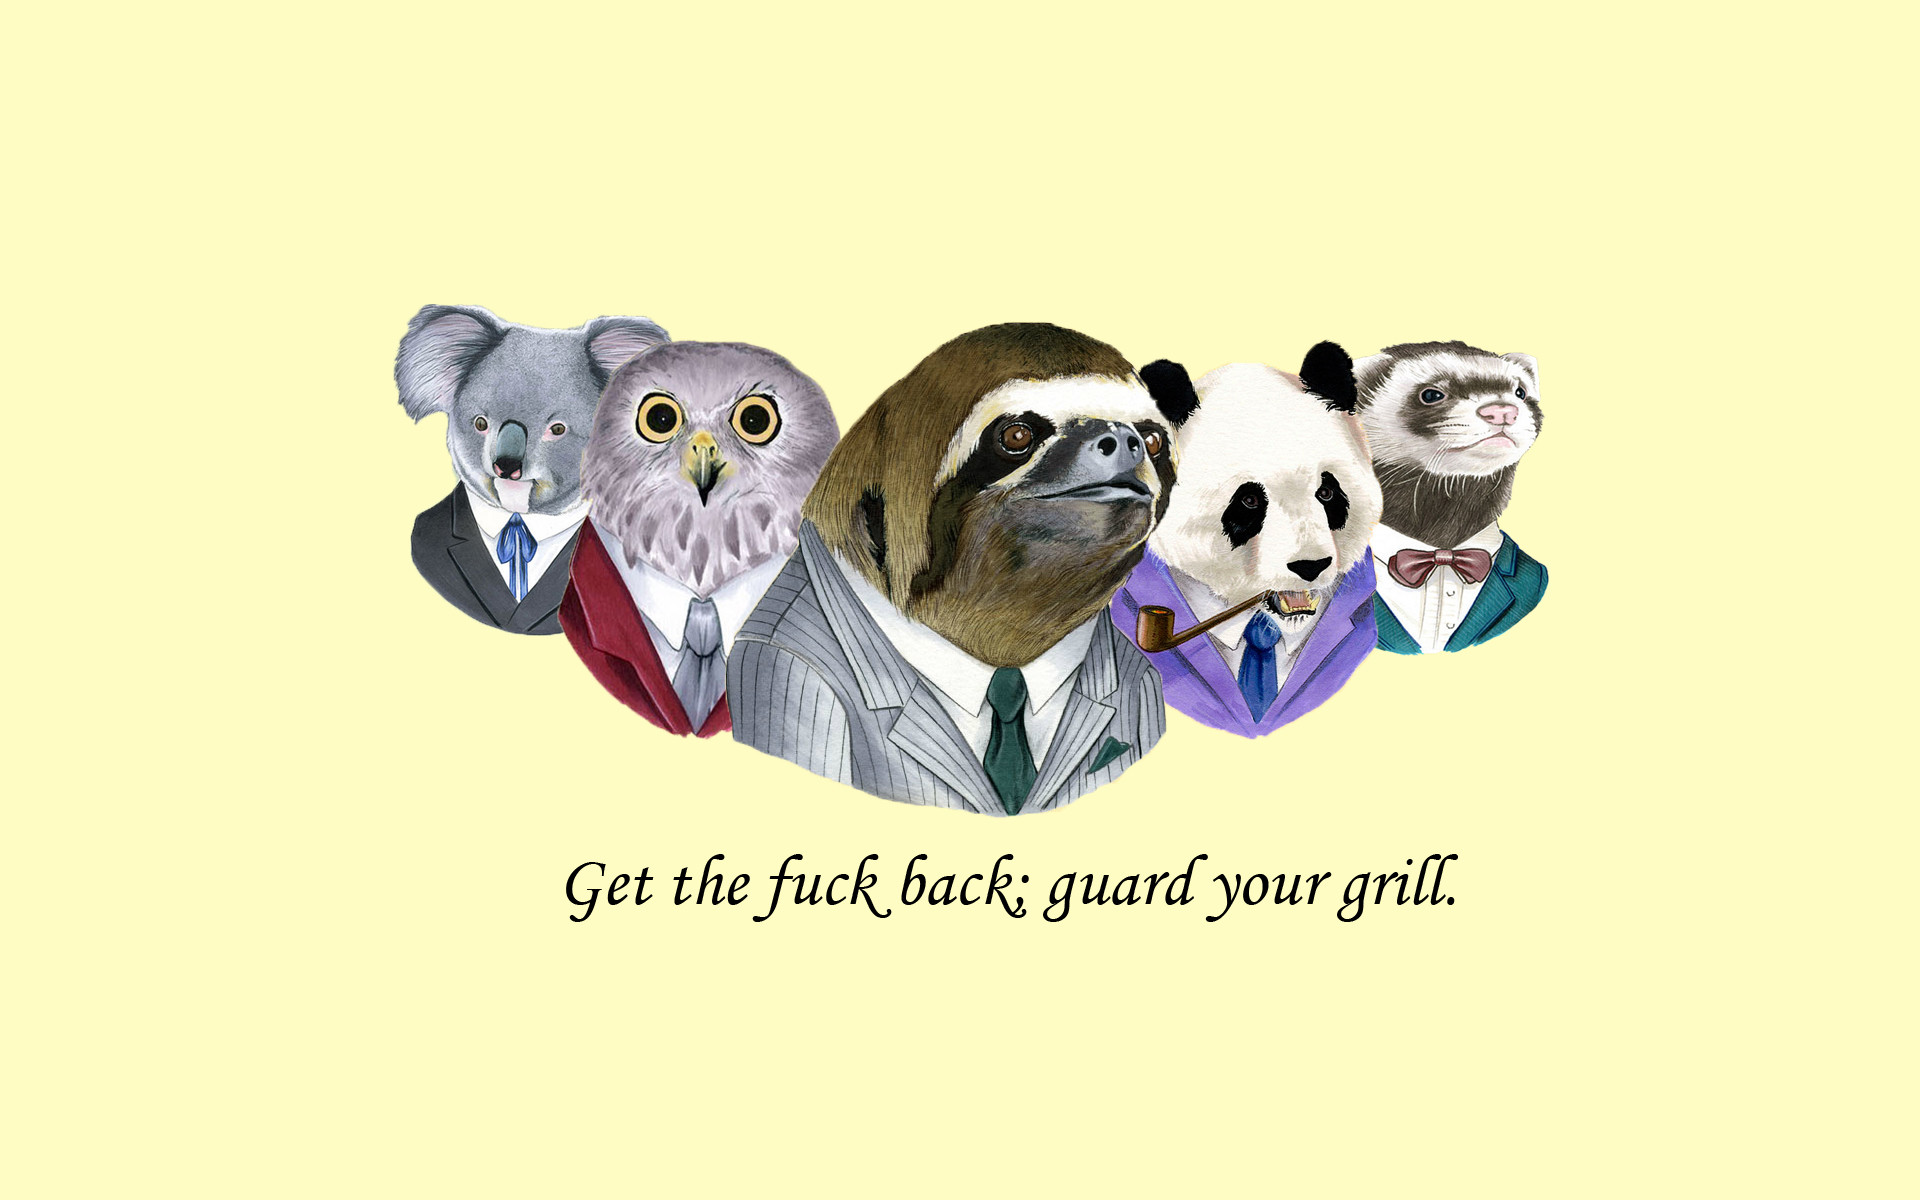 1920x1200 suit, panda,best humor images,sloth, cool images, koala, free vectors,  fuck, funny images, owl wtf, iphone, weasel Wallpaper HD